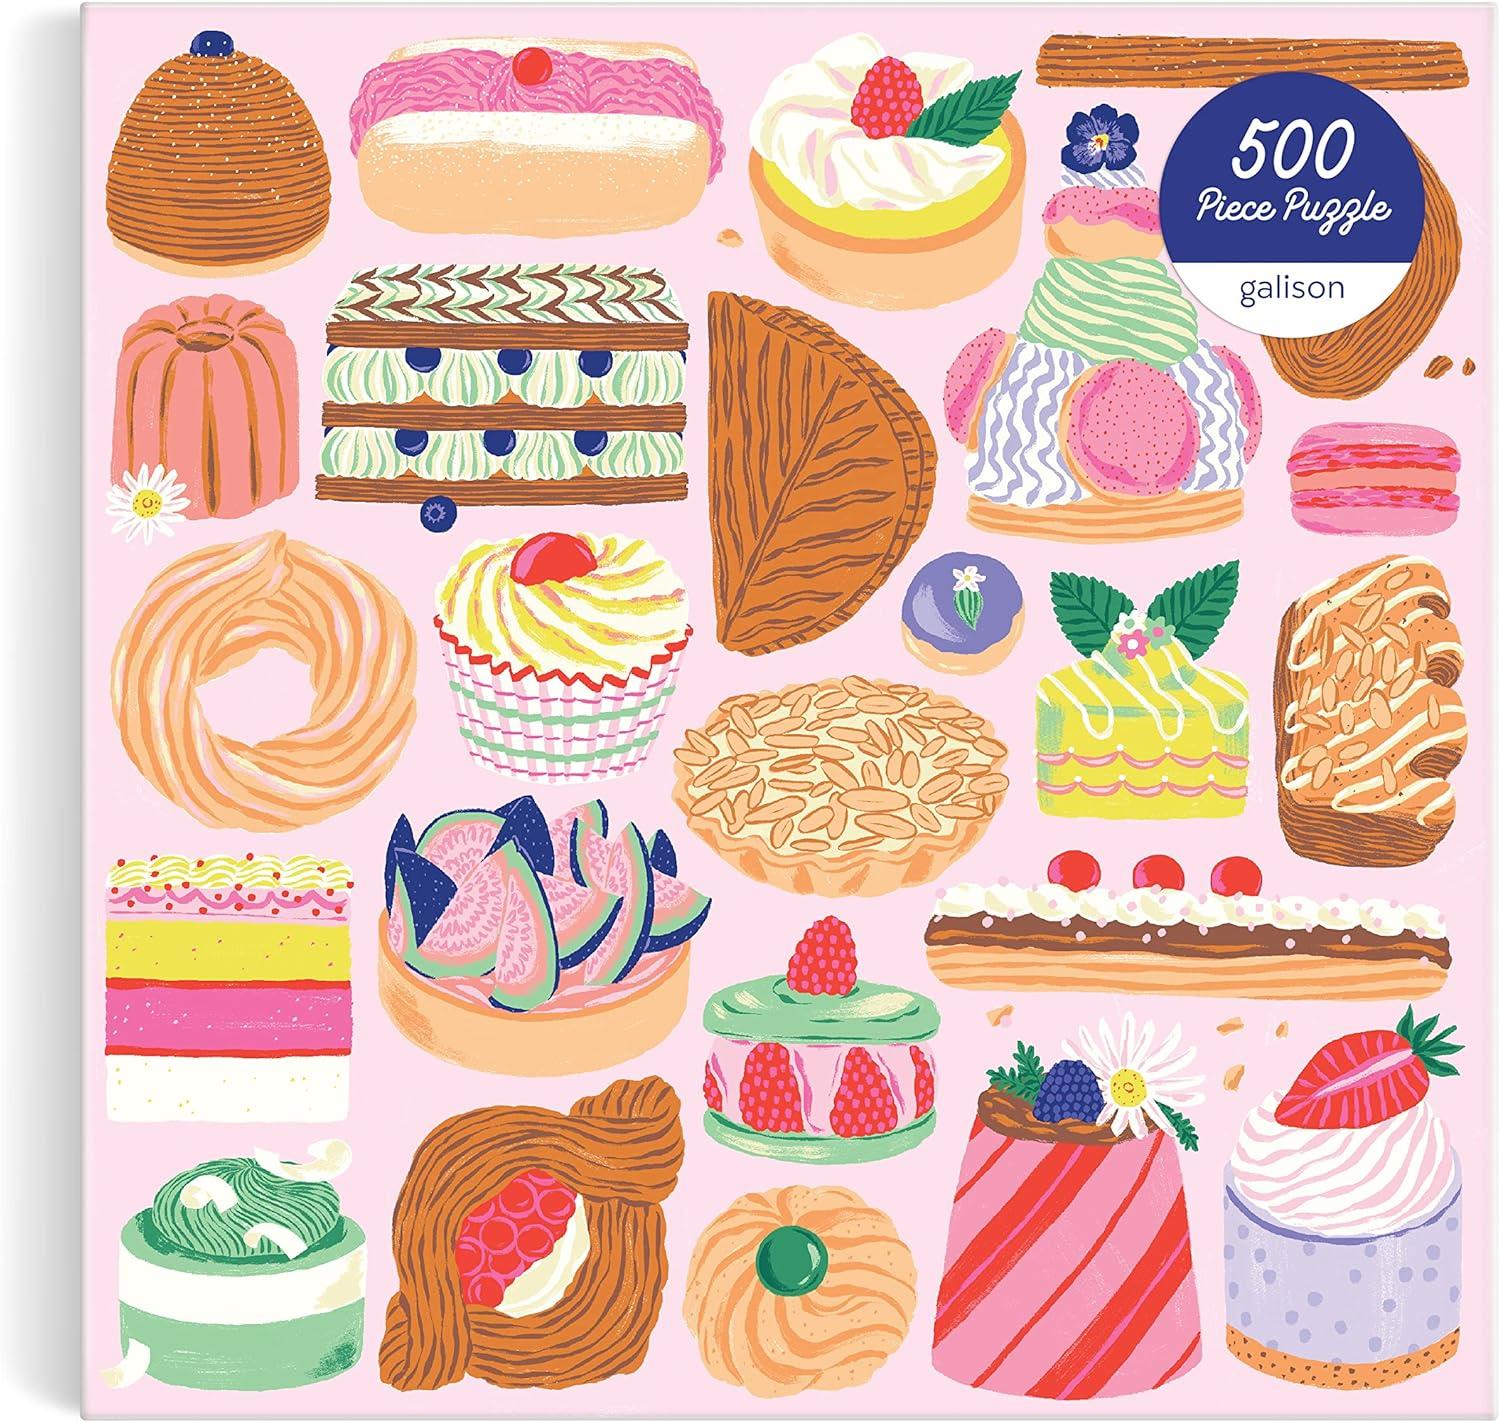 Galison Sweet Confections Jigsaw Puzzle (500 Pieces)